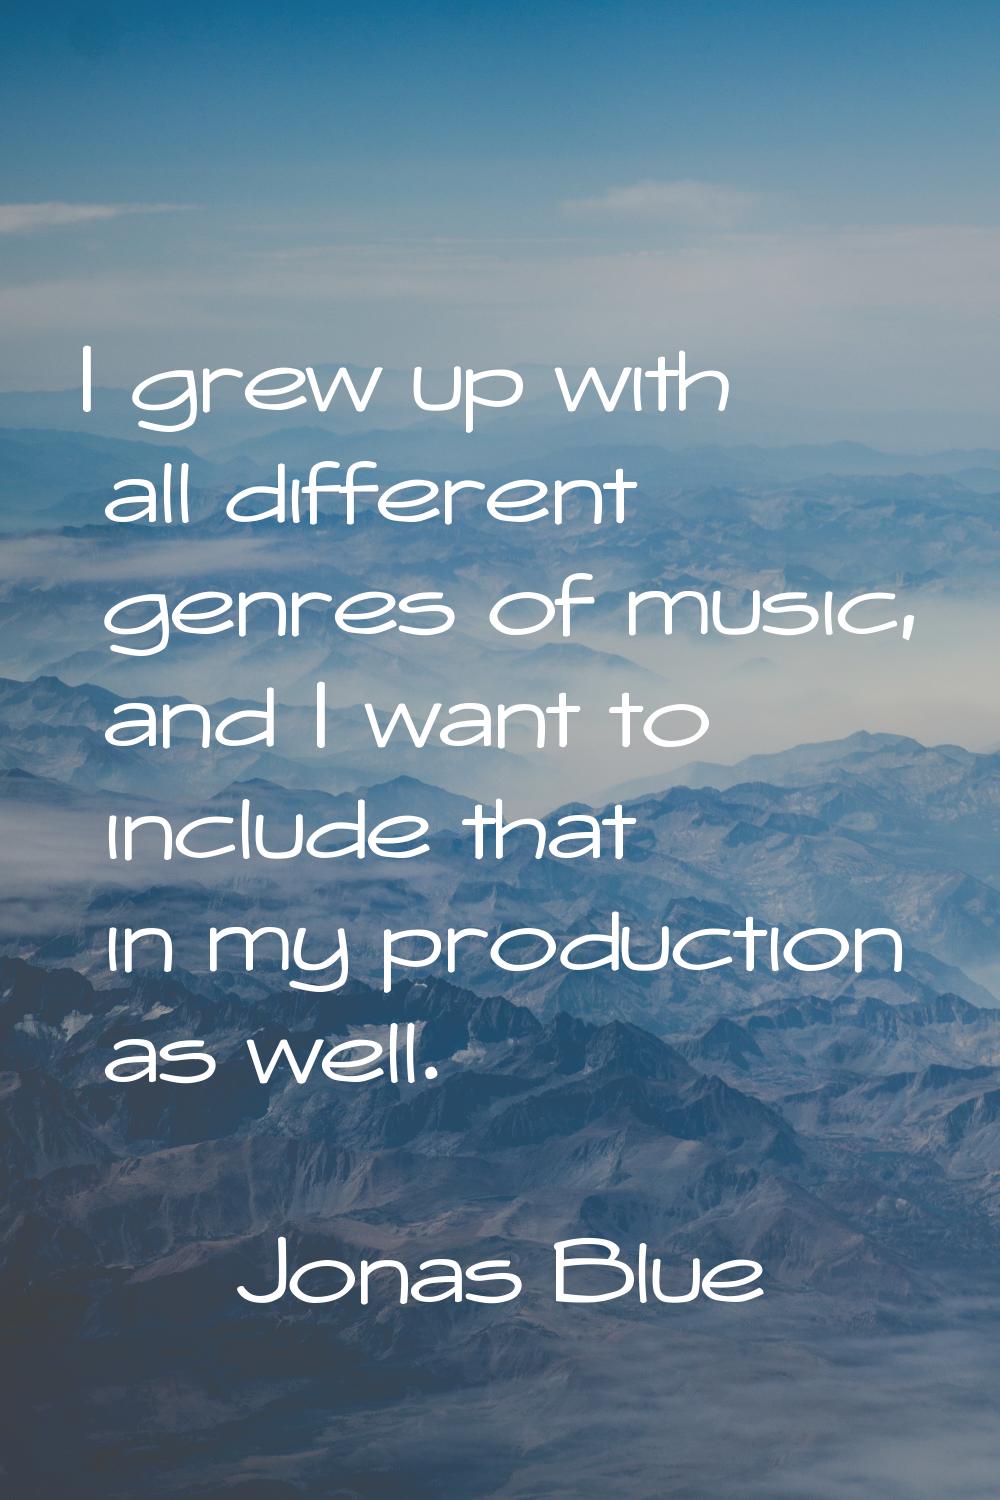 I grew up with all different genres of music, and I want to include that in my production as well.